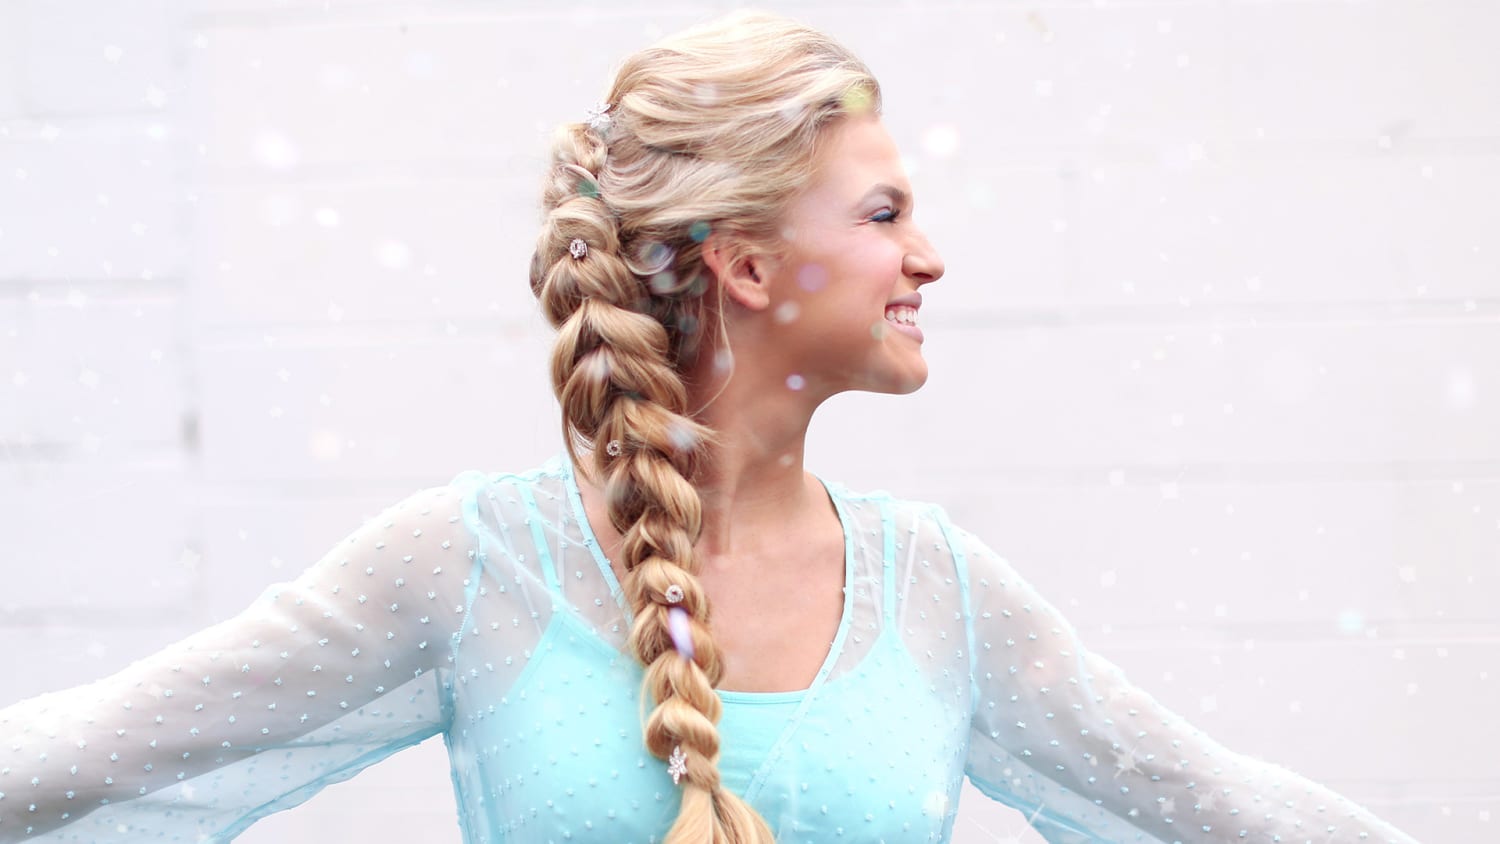 Once Upon a Time: Season 4 Poster Features Elsa - IGN